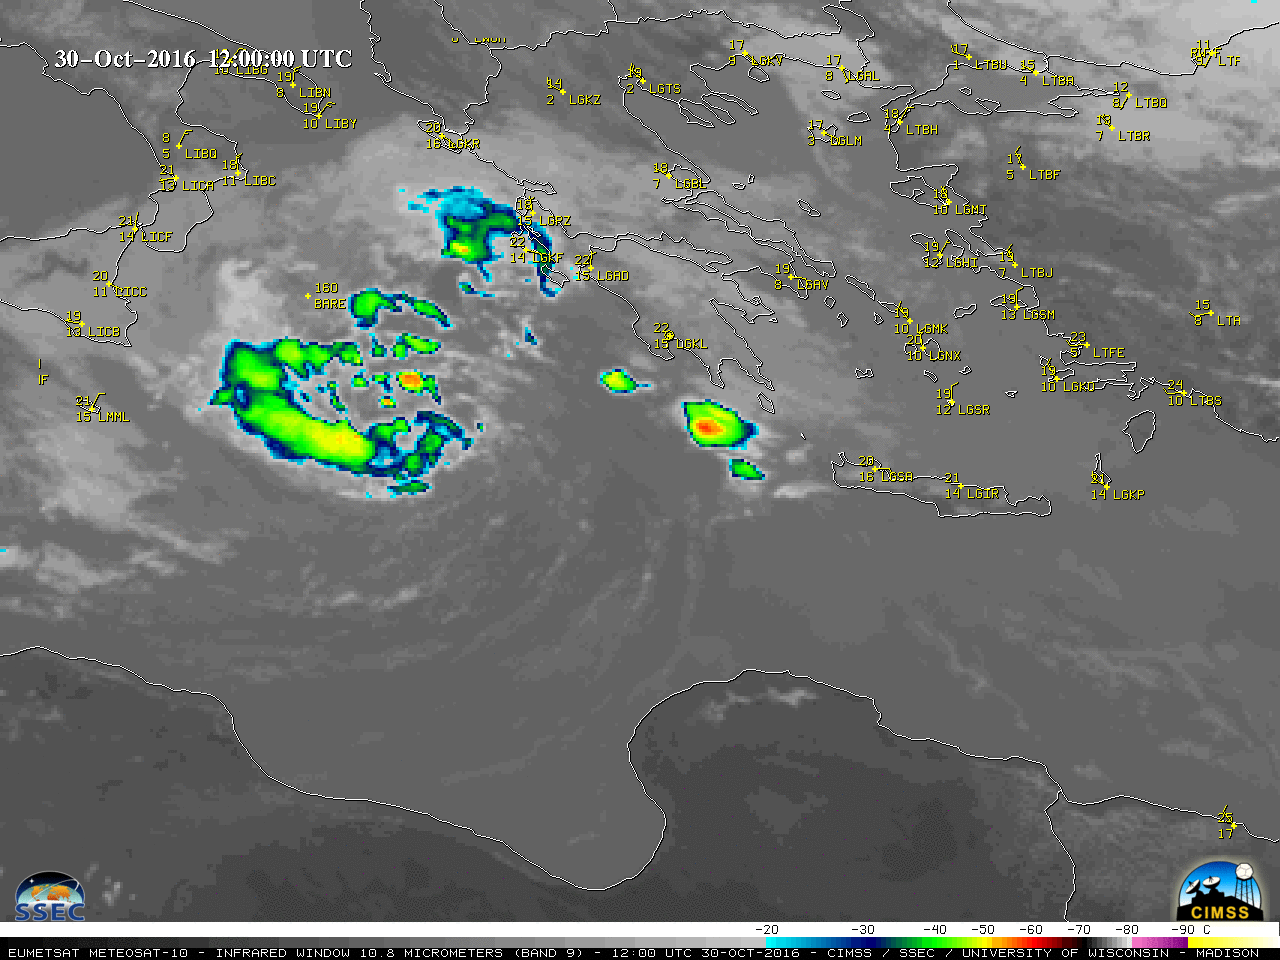 EUMETSAT Meteosat-10 Infrared Window (10.8 um) images [click to play MP4 animation] 